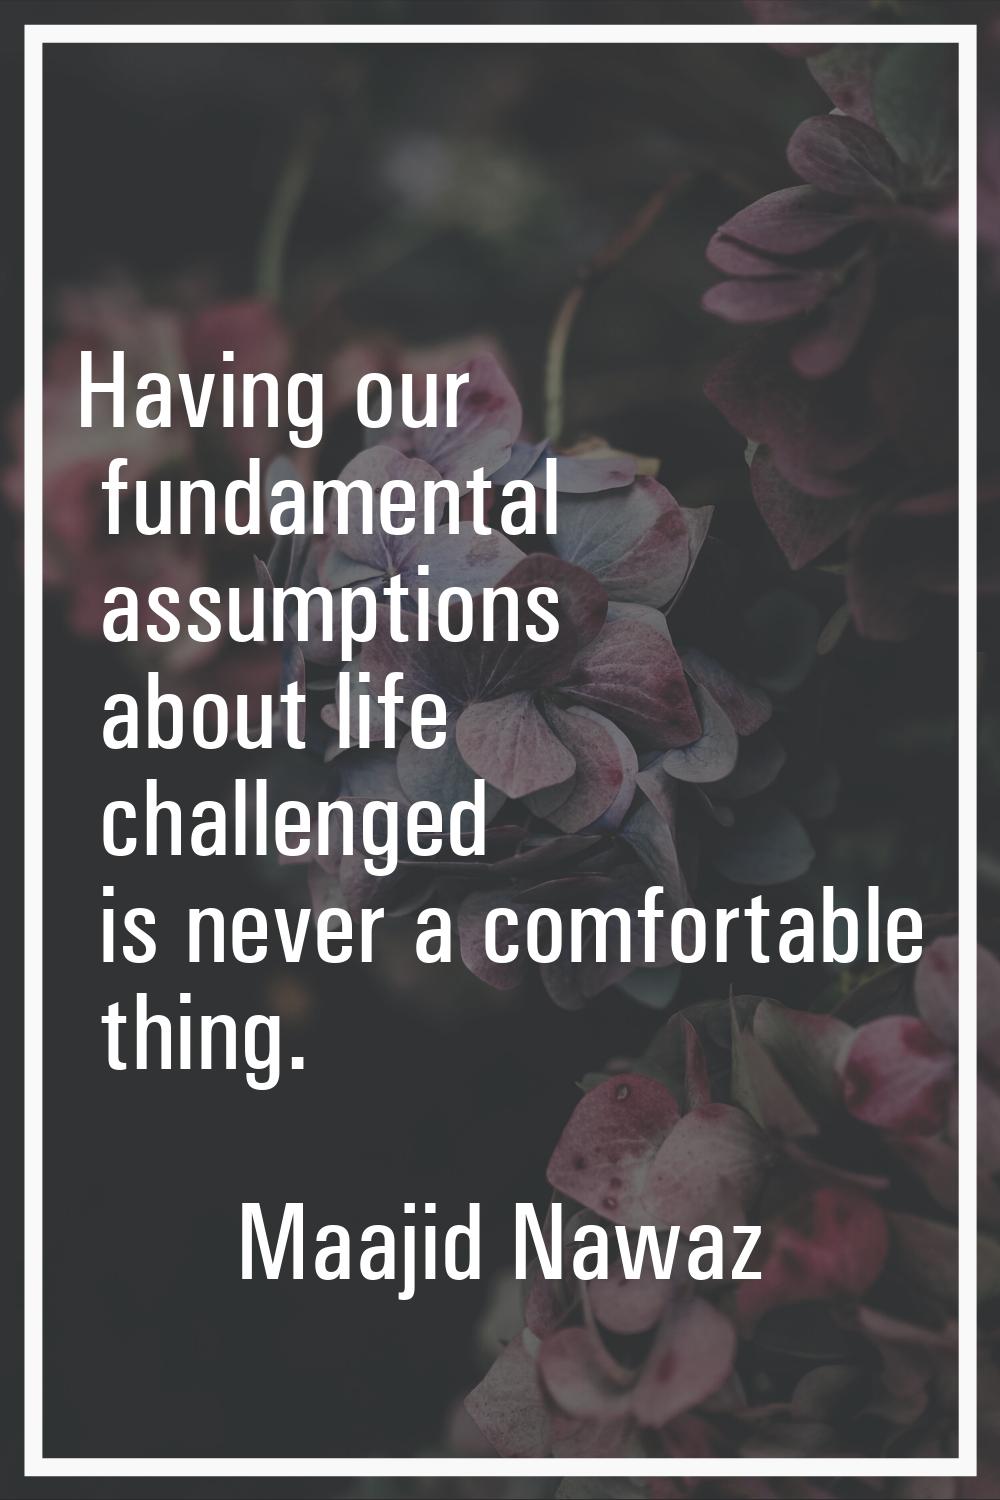 Having our fundamental assumptions about life challenged is never a comfortable thing.